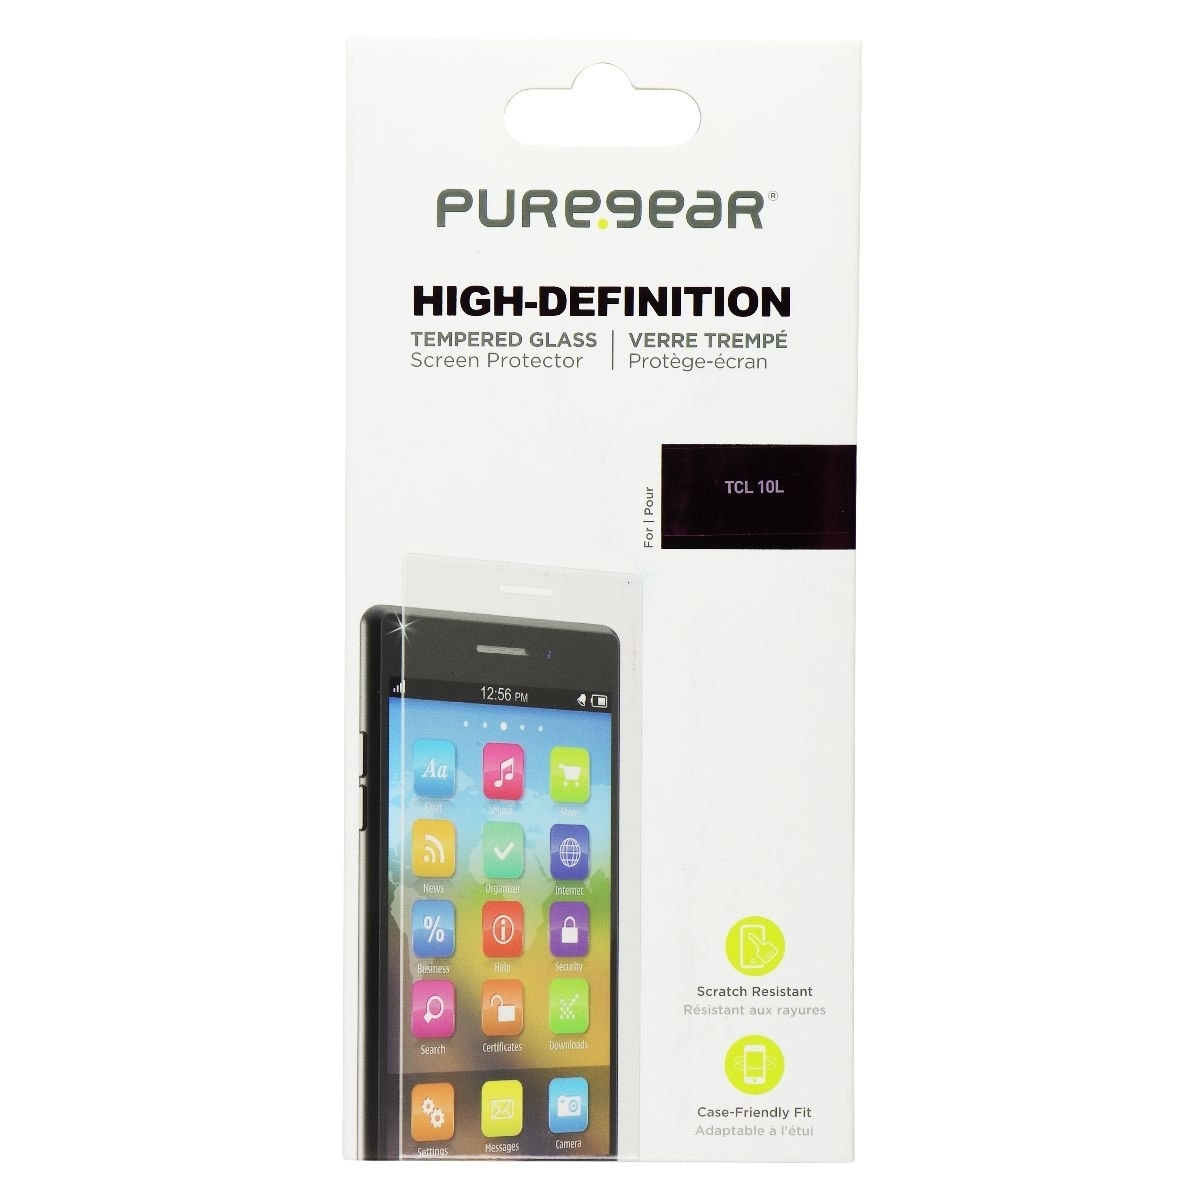 PureGear High-Definition Tempered Glass For TCL 10L - Clear (Refurbished)